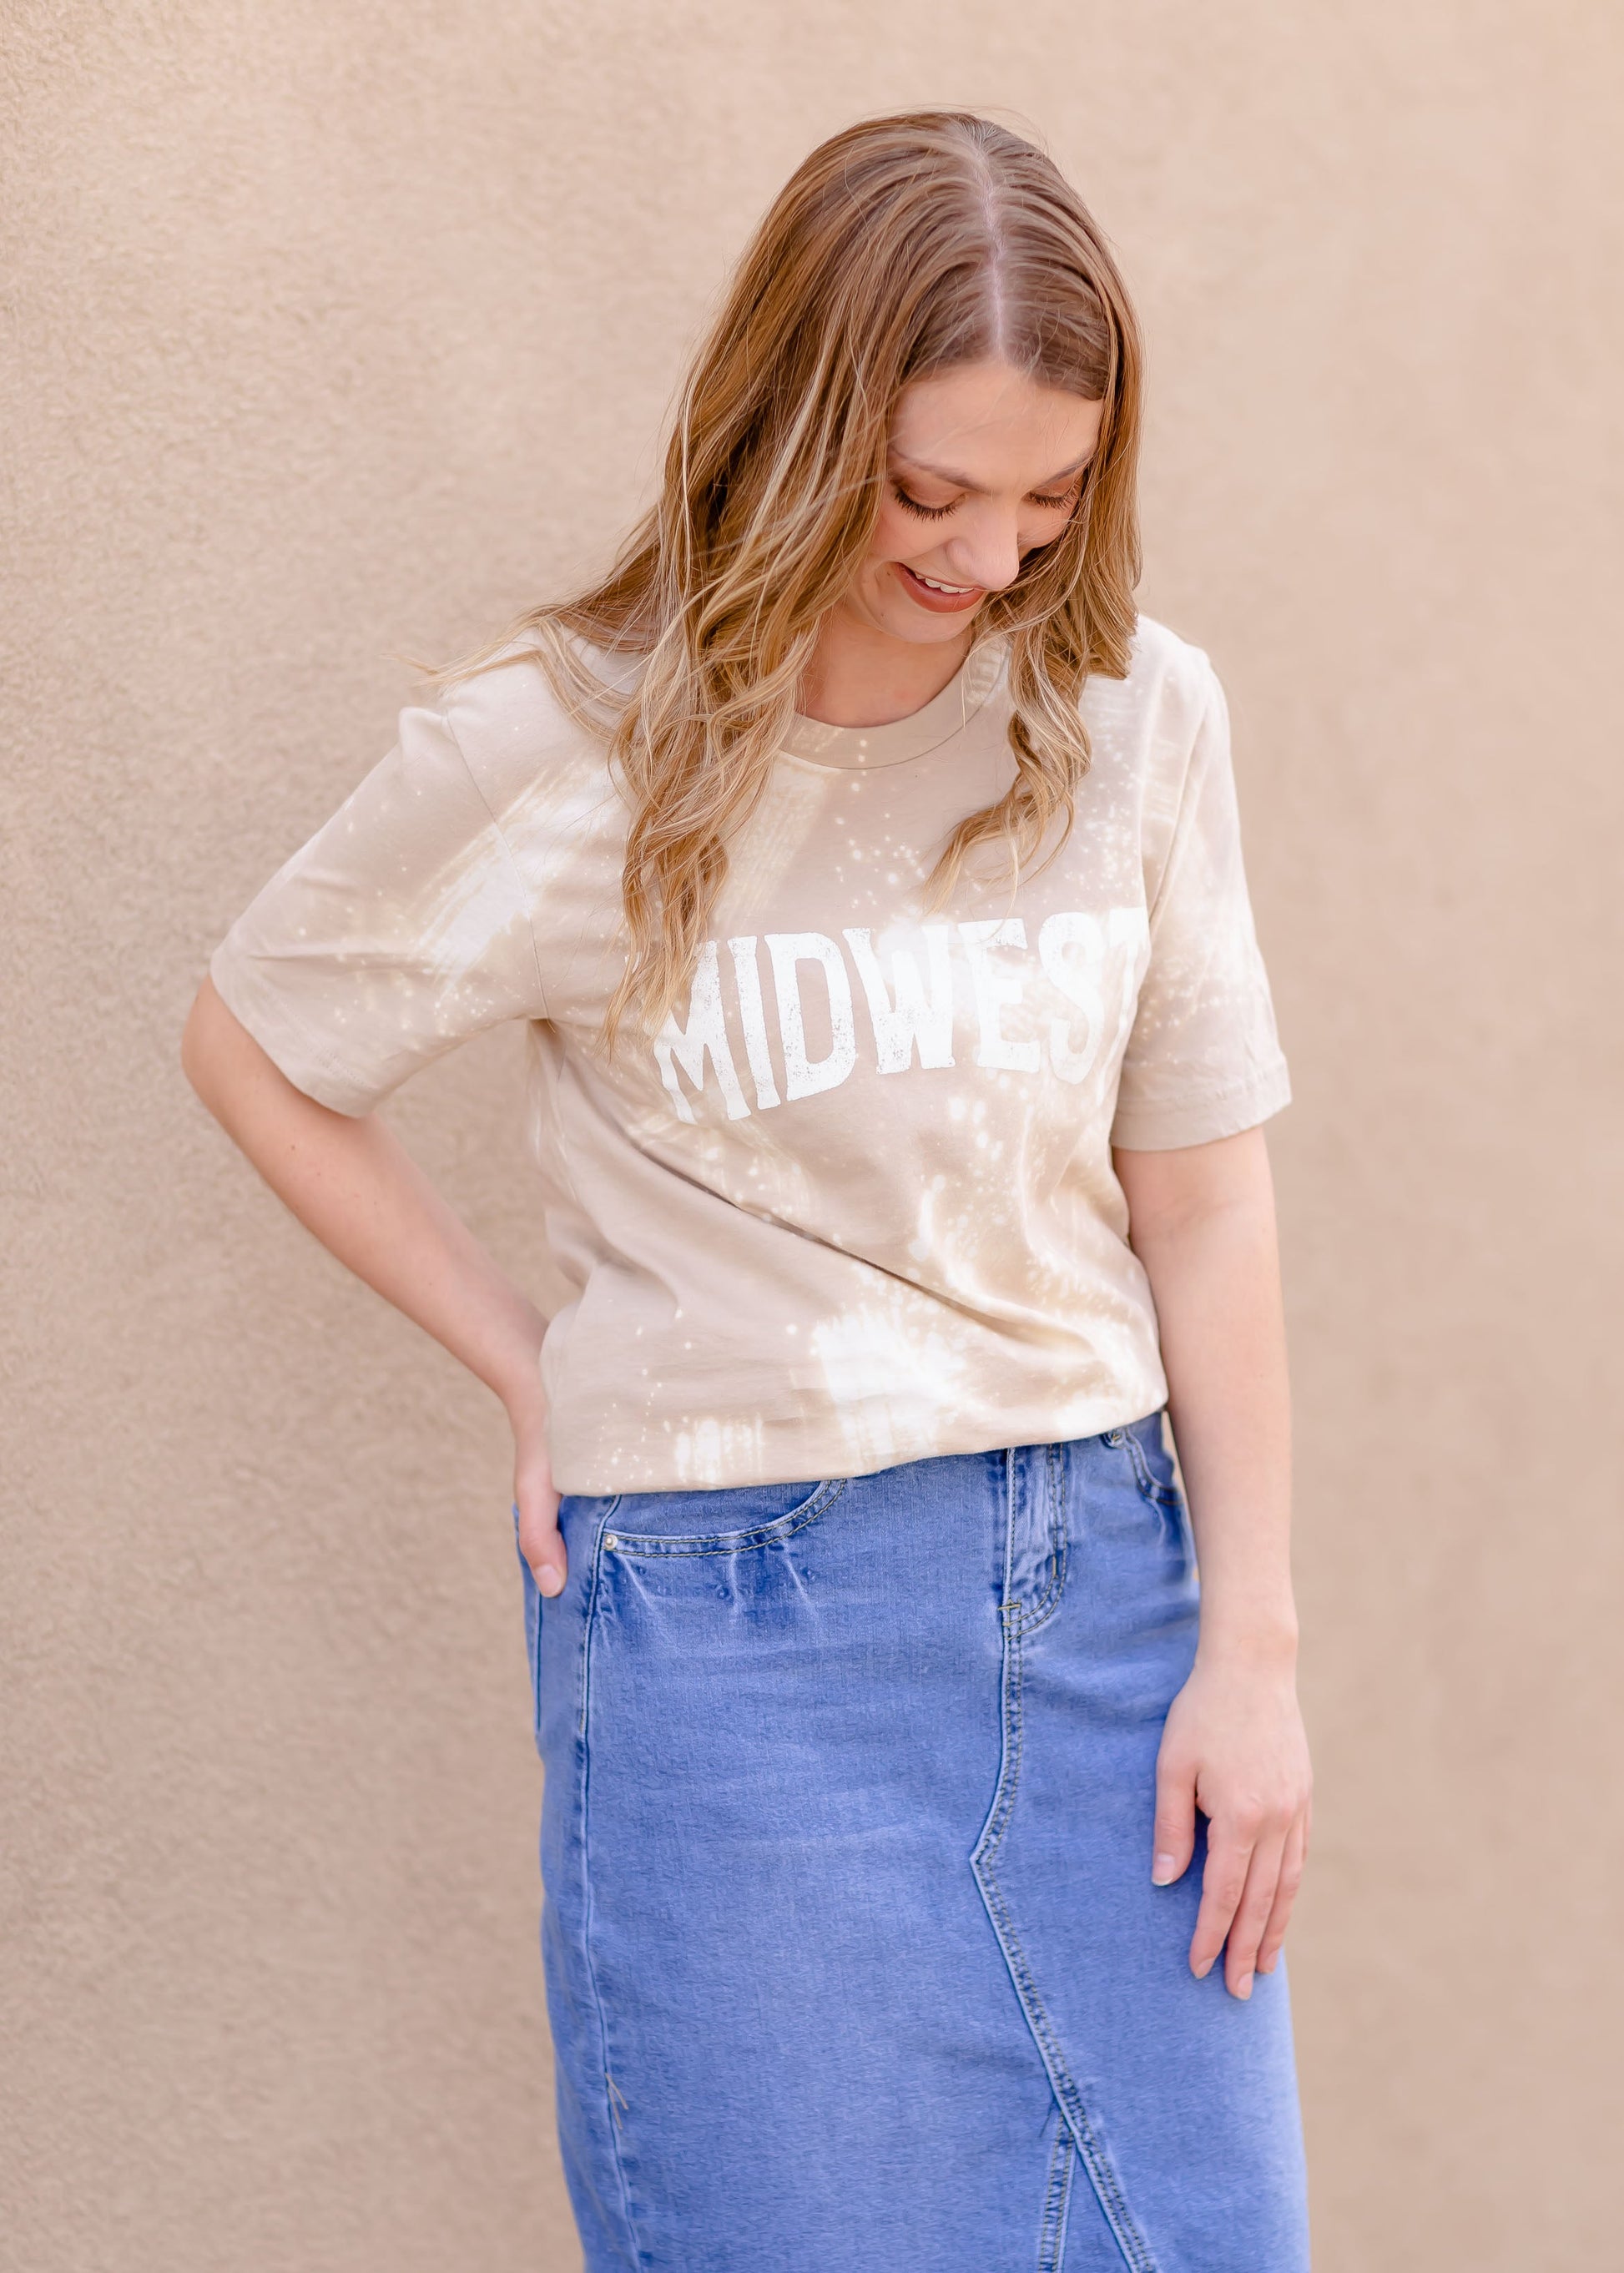 Midwest Bleached Graphic Tee Tops